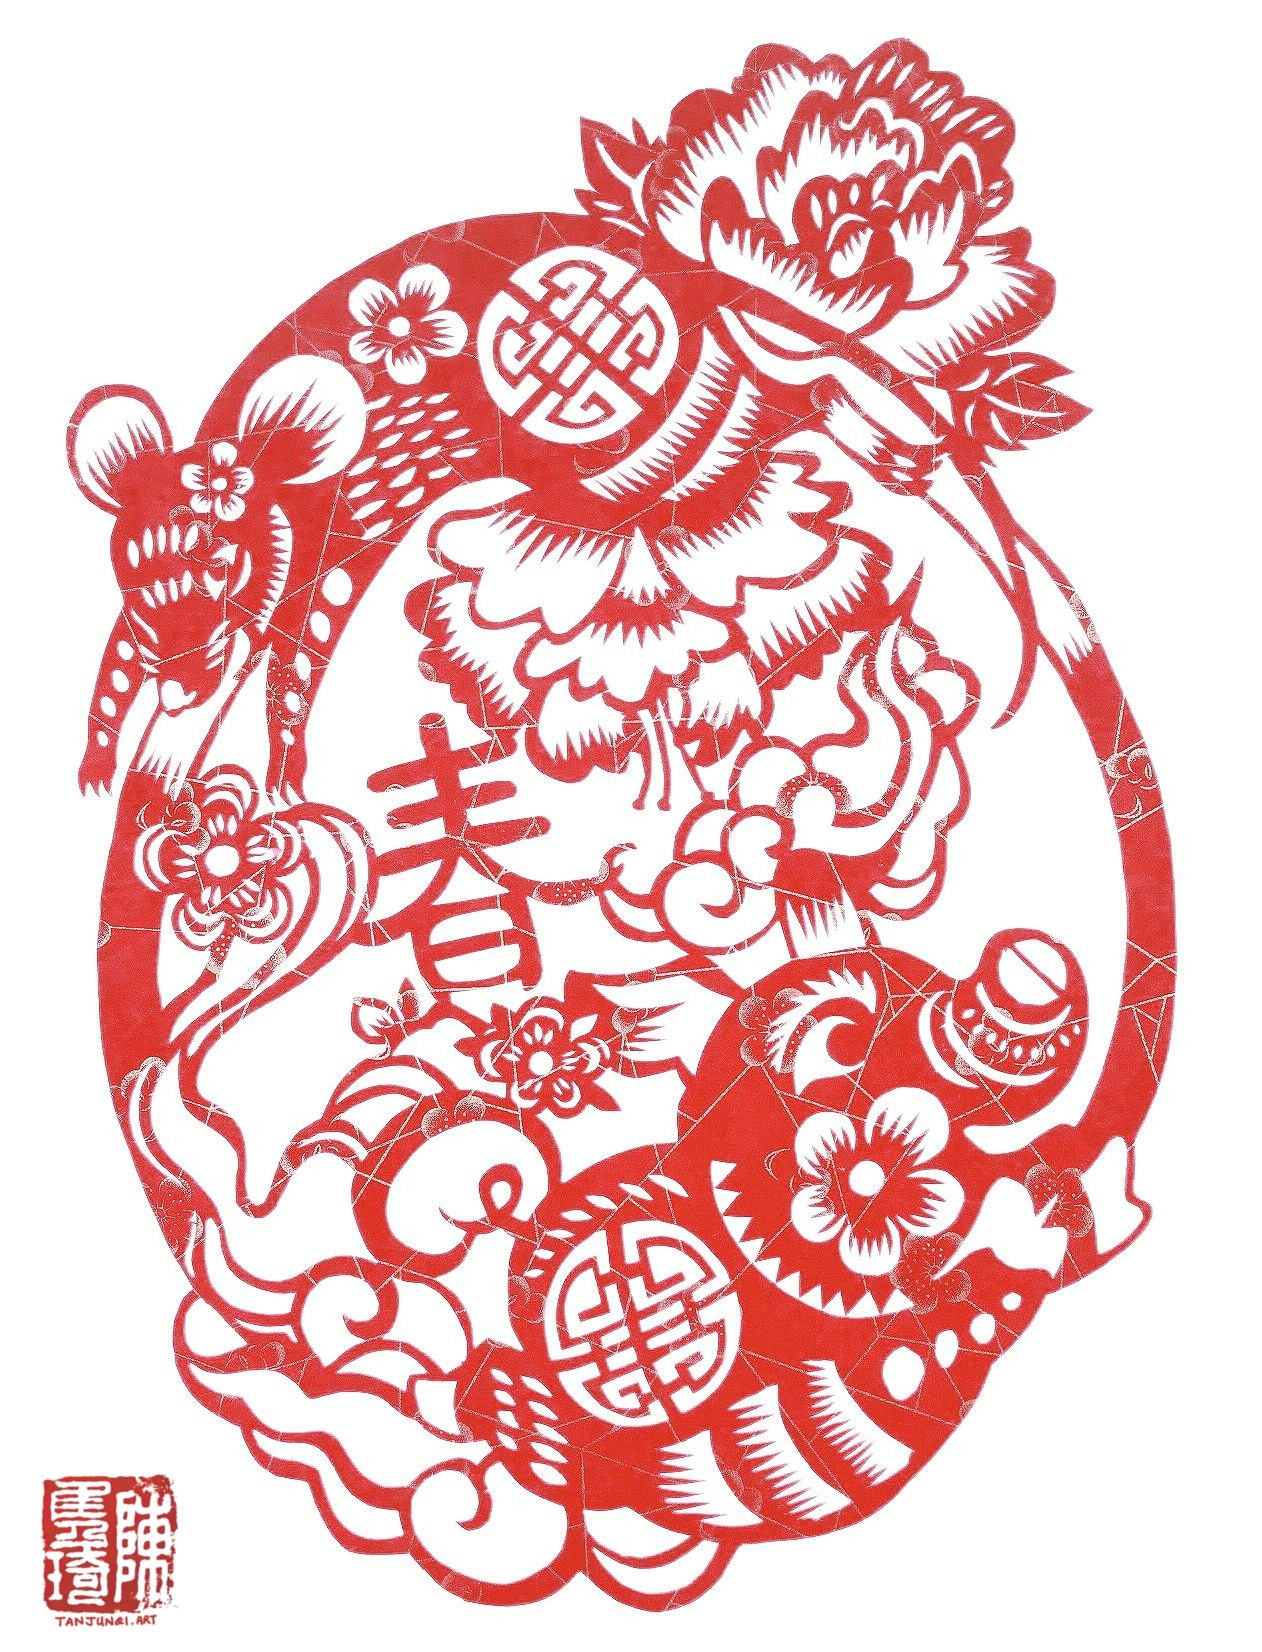 Chinese papercut of a rat leaping and pig flying through the air, with the arch of their bodies combining into an oval, adorned with peonies and lucky cloud patterns. The chinese word for 'Spring' sits in the center